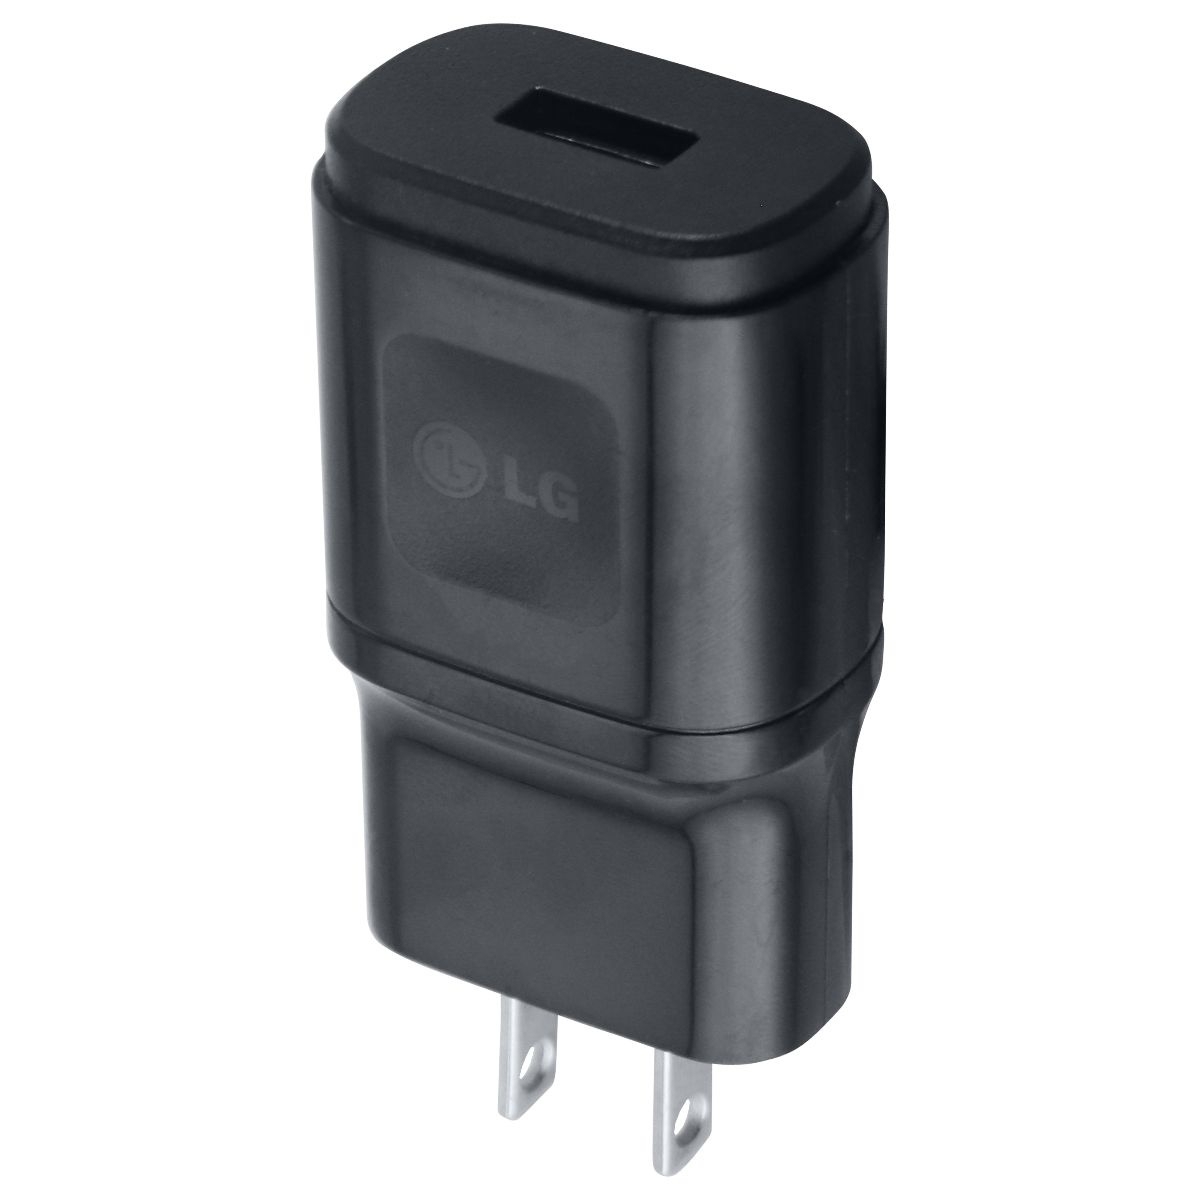 LG (5V/1.8A) Single USB Wall Charger Travel Adapter - Black (MCS-04WR2 / 04WD2)